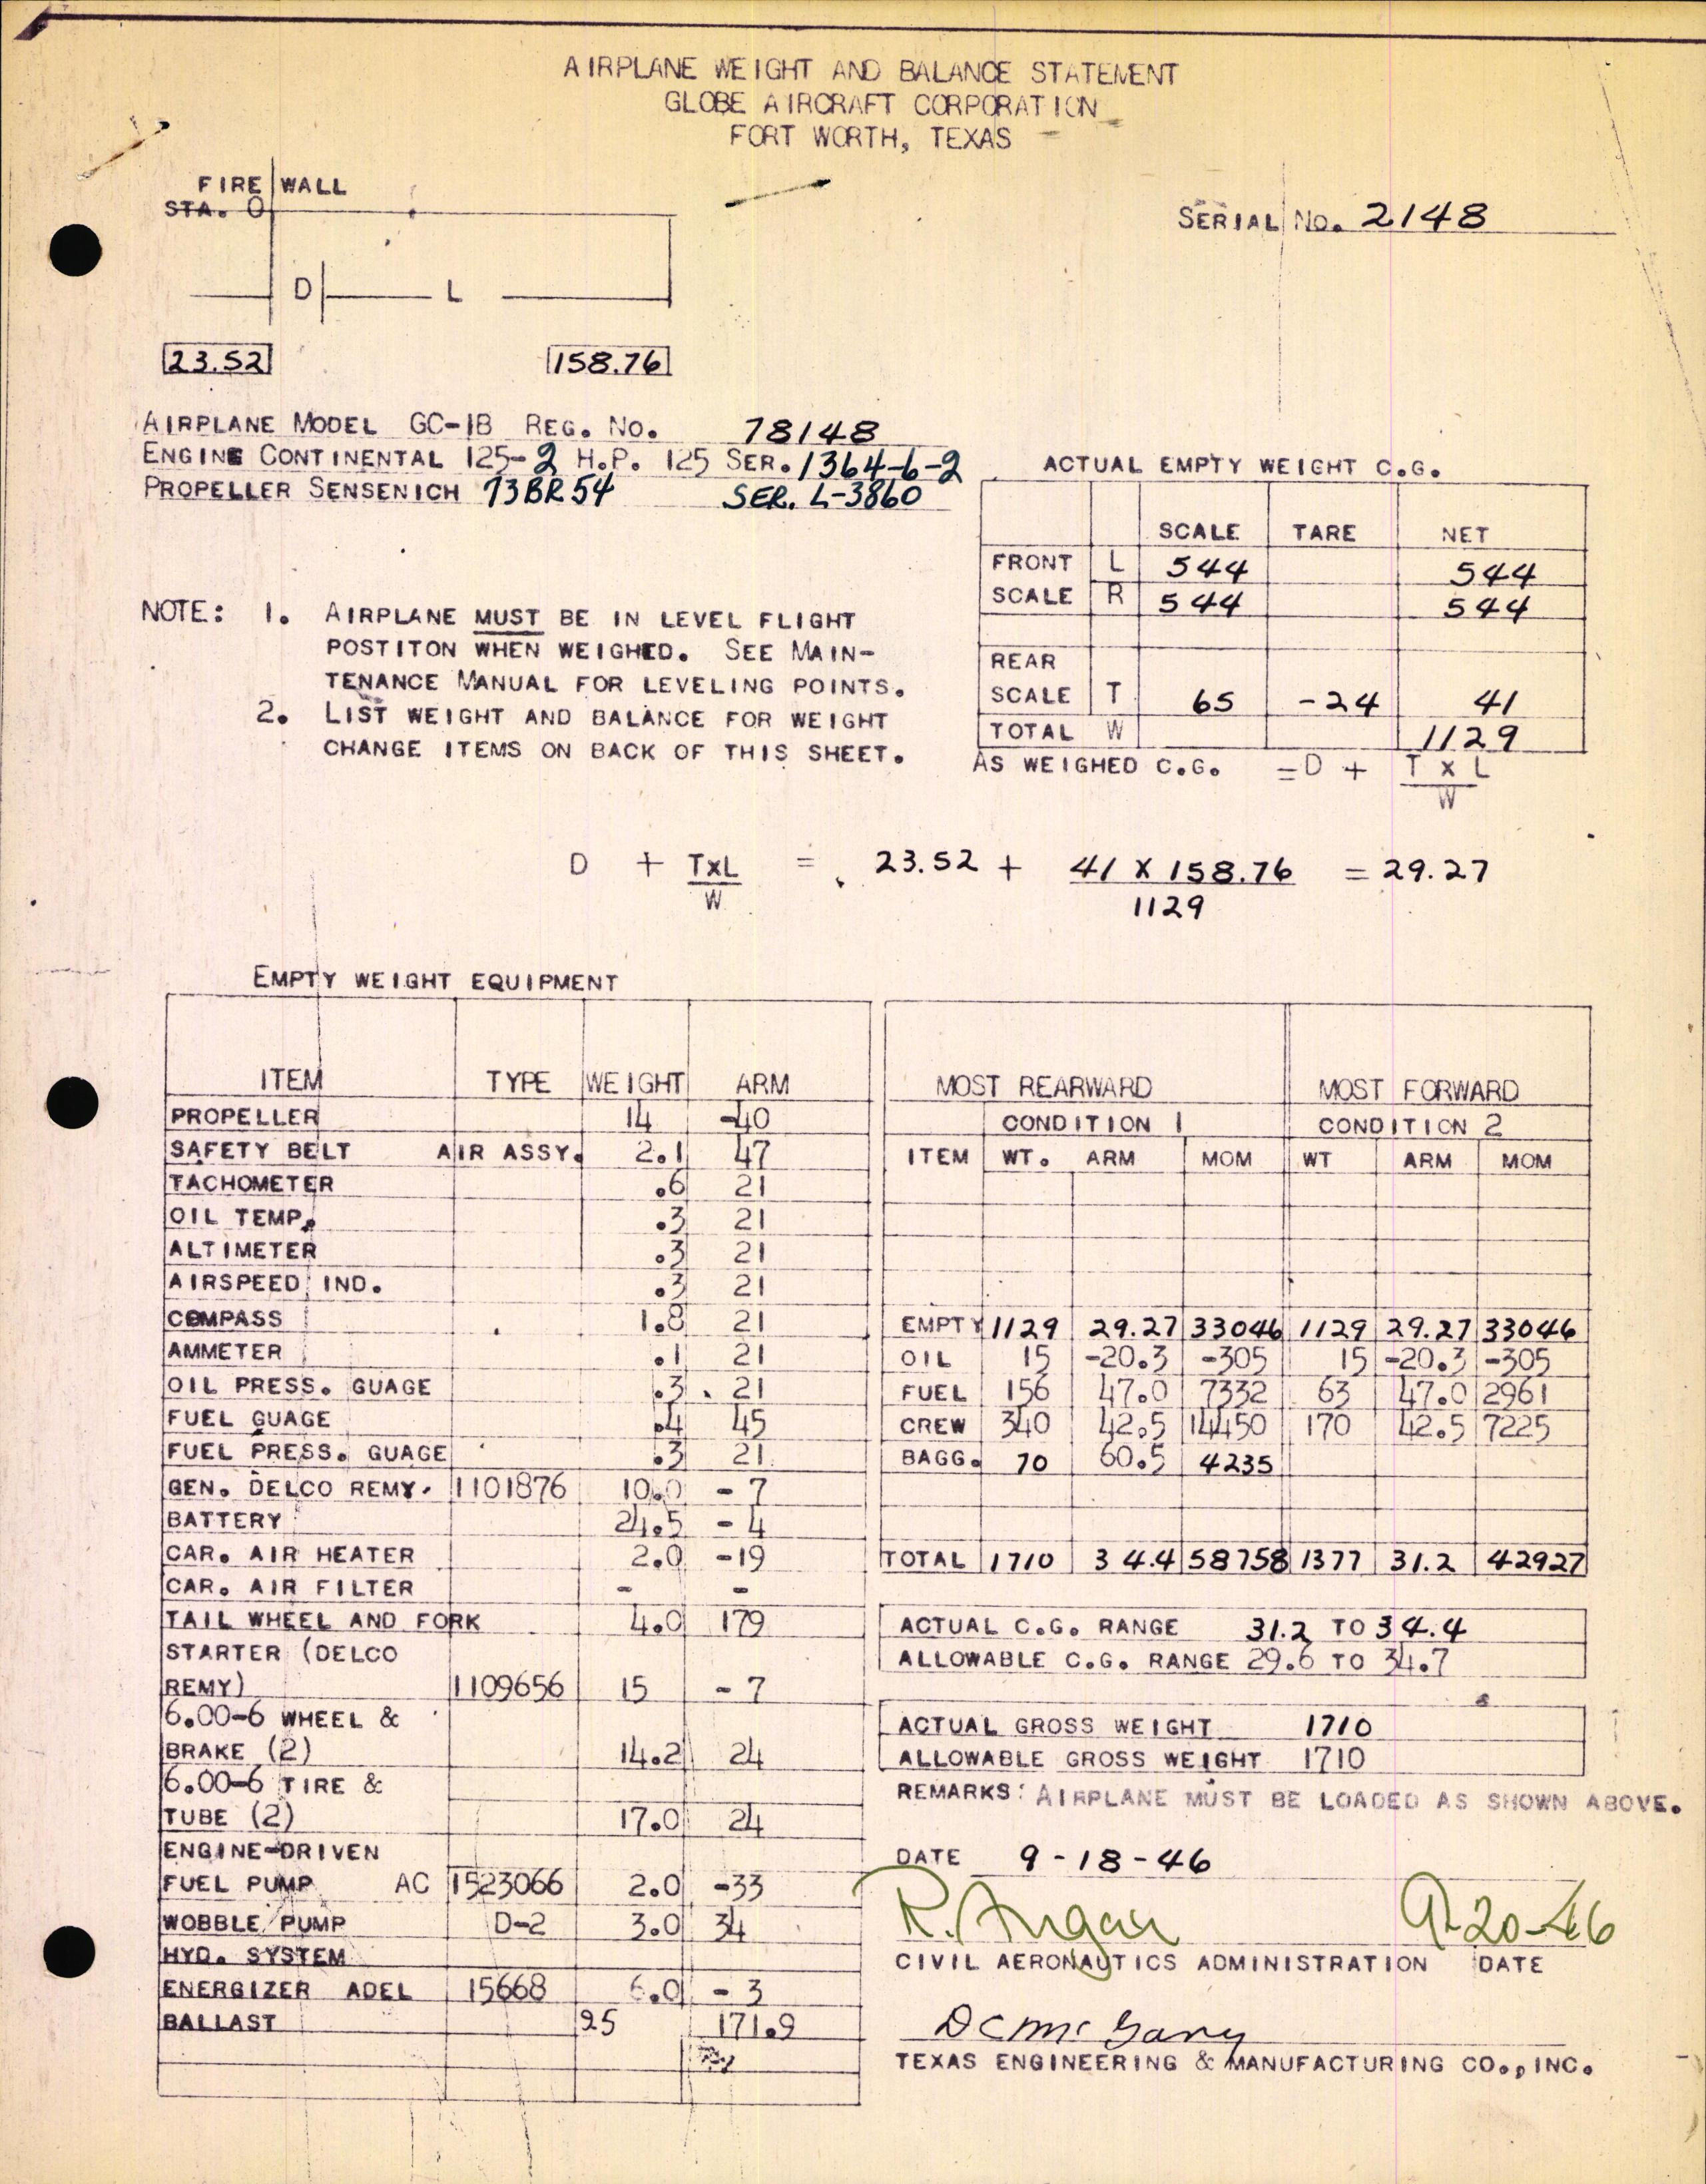 Sample page 3 from AirCorps Library document: Technical Information for Serial Number 2148